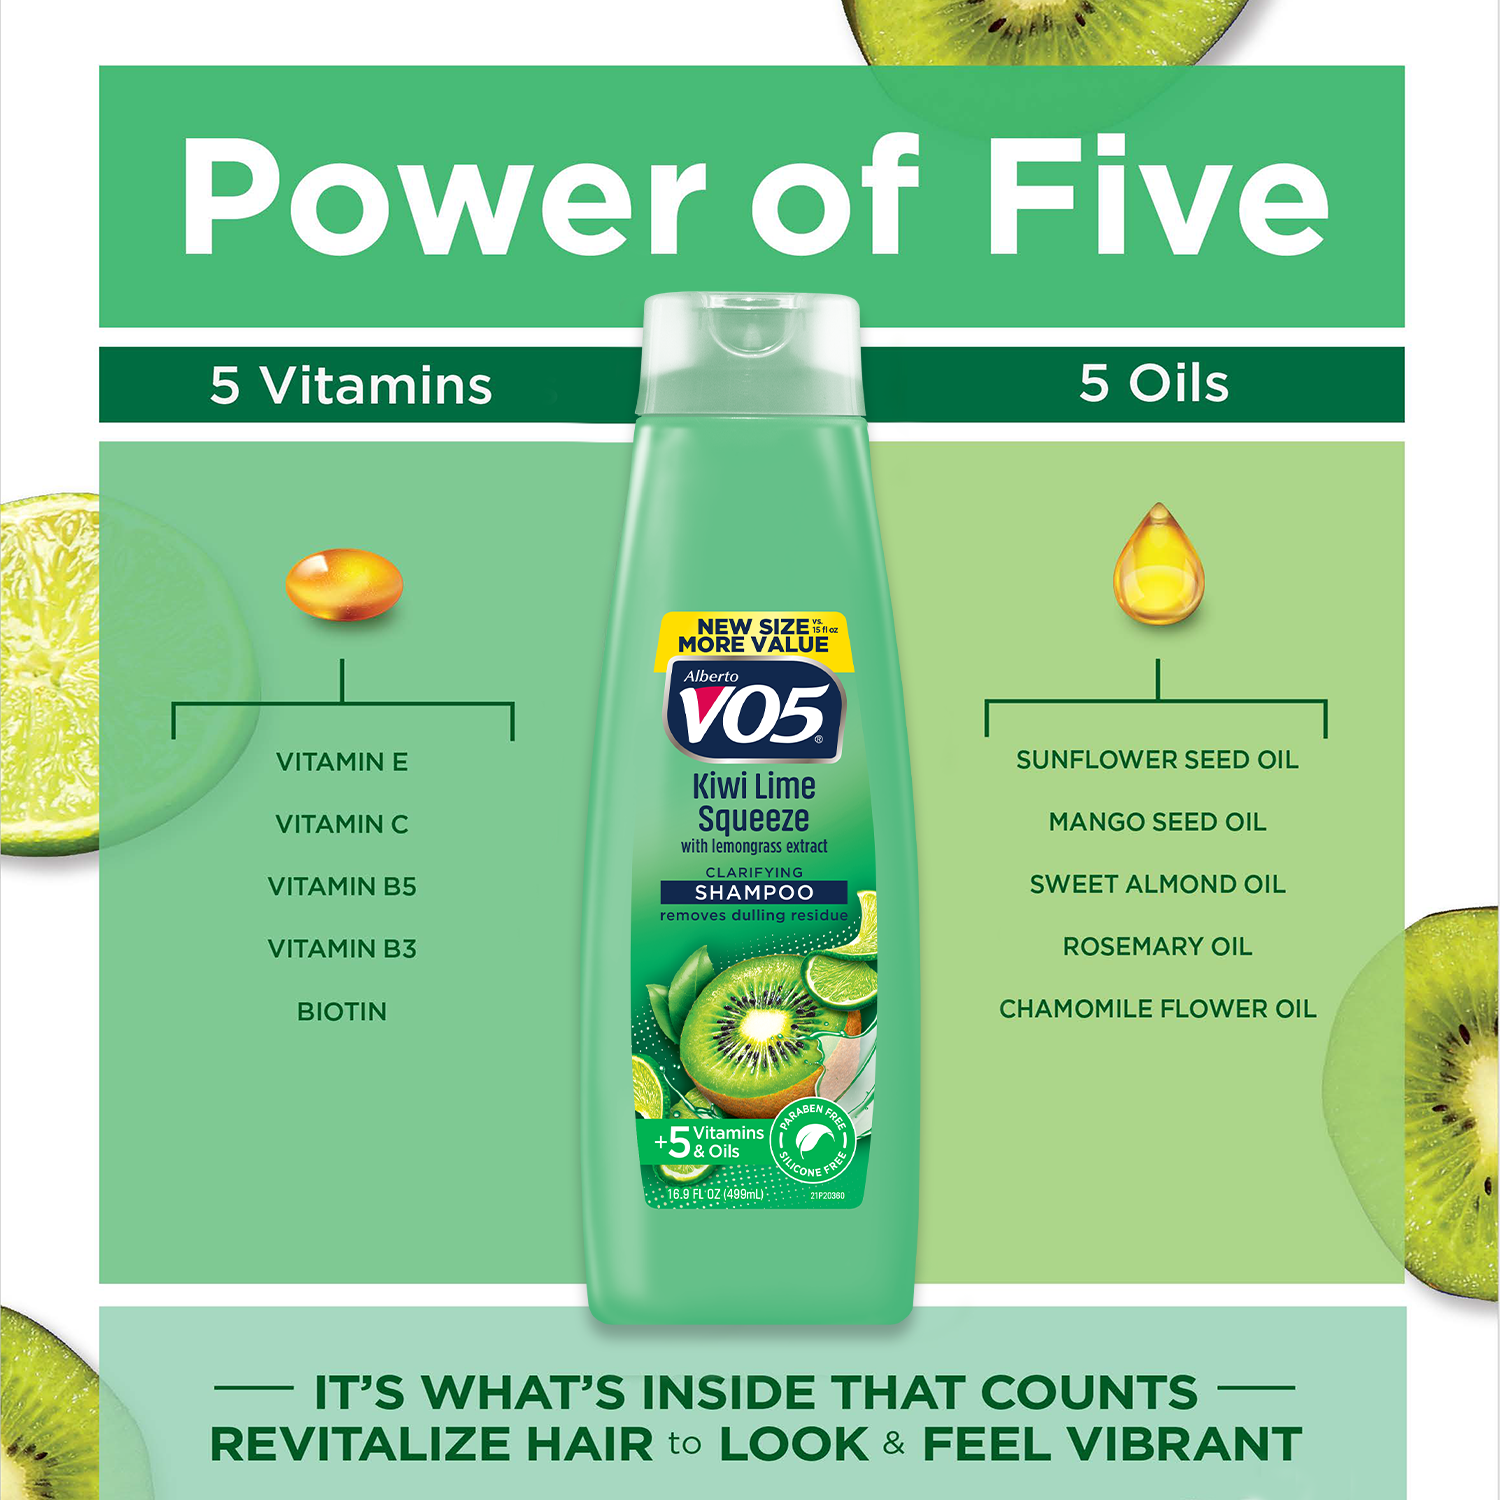 Alberto VO5 Kiwi Lime Squeeze Clarifying Shampoo with Vitamin E & C, for All Hair Types, 16.9 fl oz - image 4 of 6